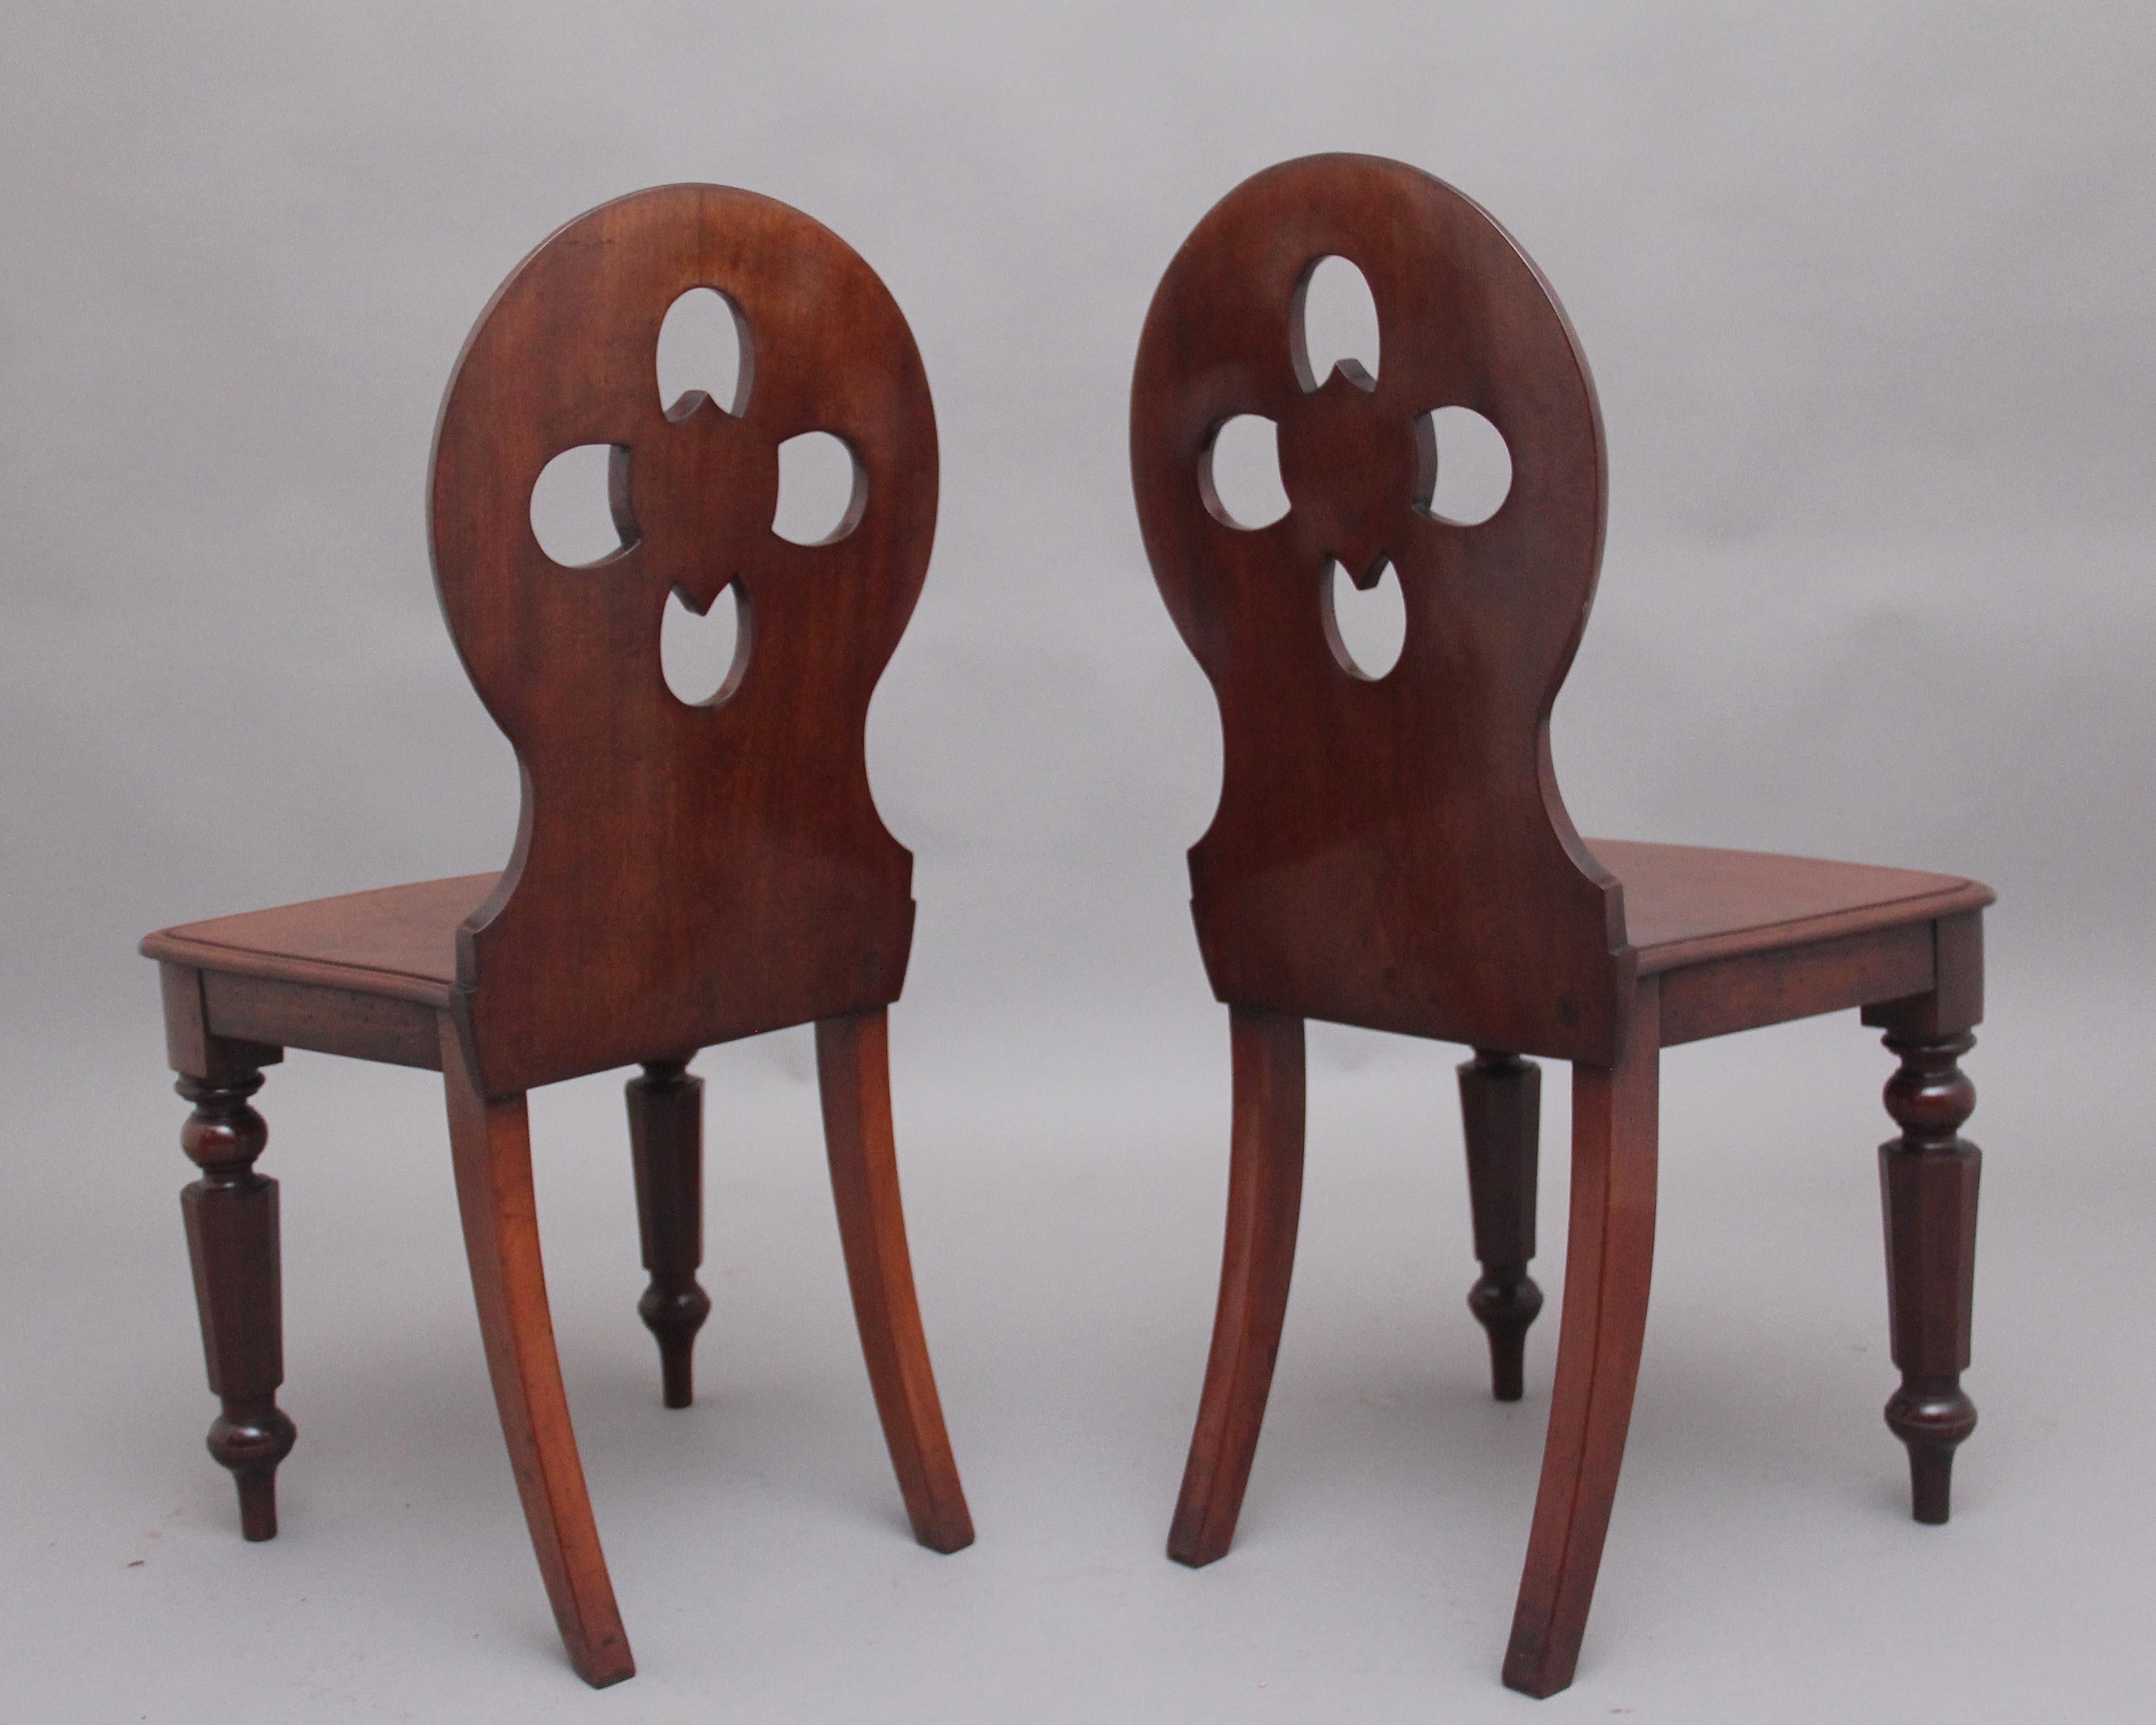 British Pair of 19th Century Antique Mahogany Hall Chairs For Sale